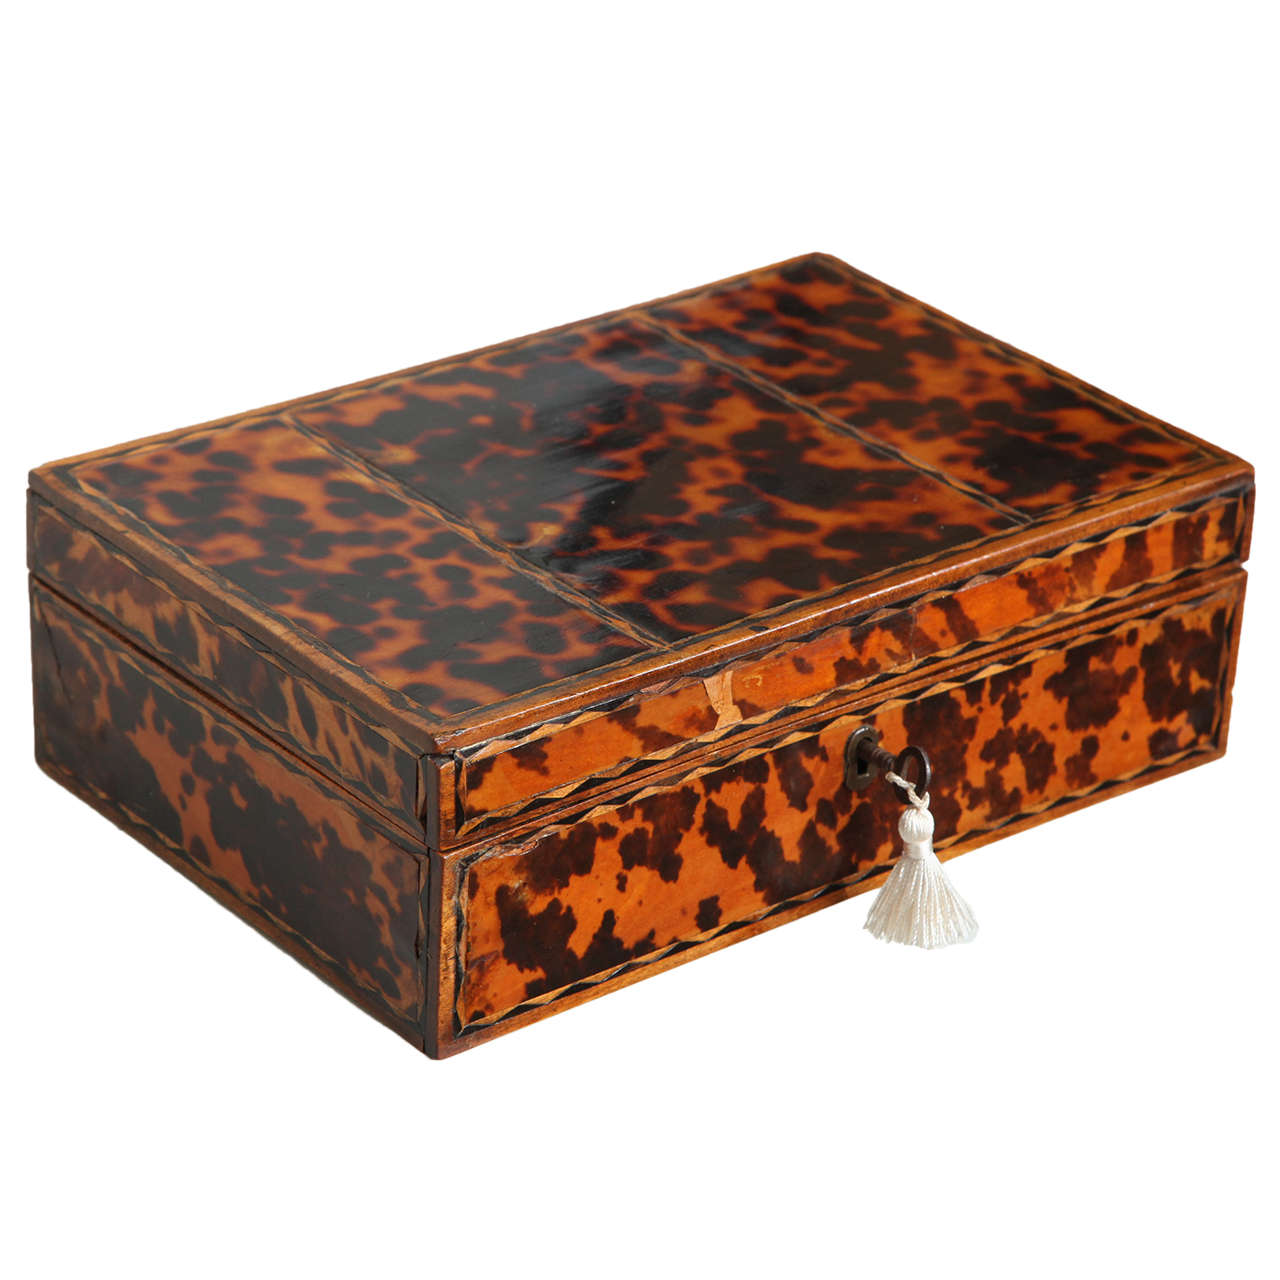 Early 19th Century Faux Tortoise Shell Inlaid Box